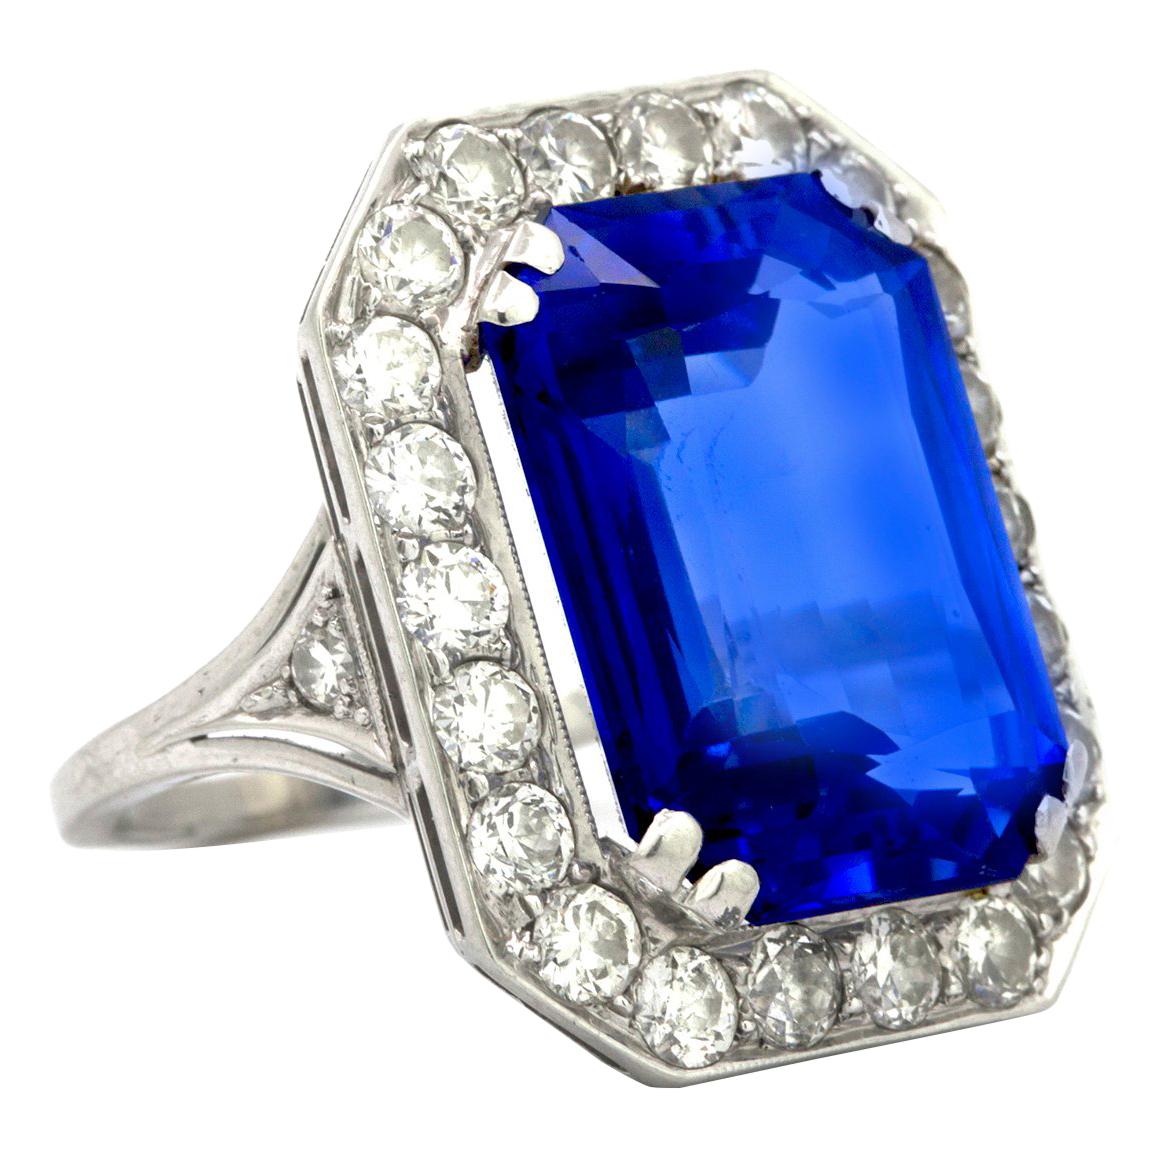 GIA Certified Synthetic Sapphire Diamond Cocktail Ring For Sale